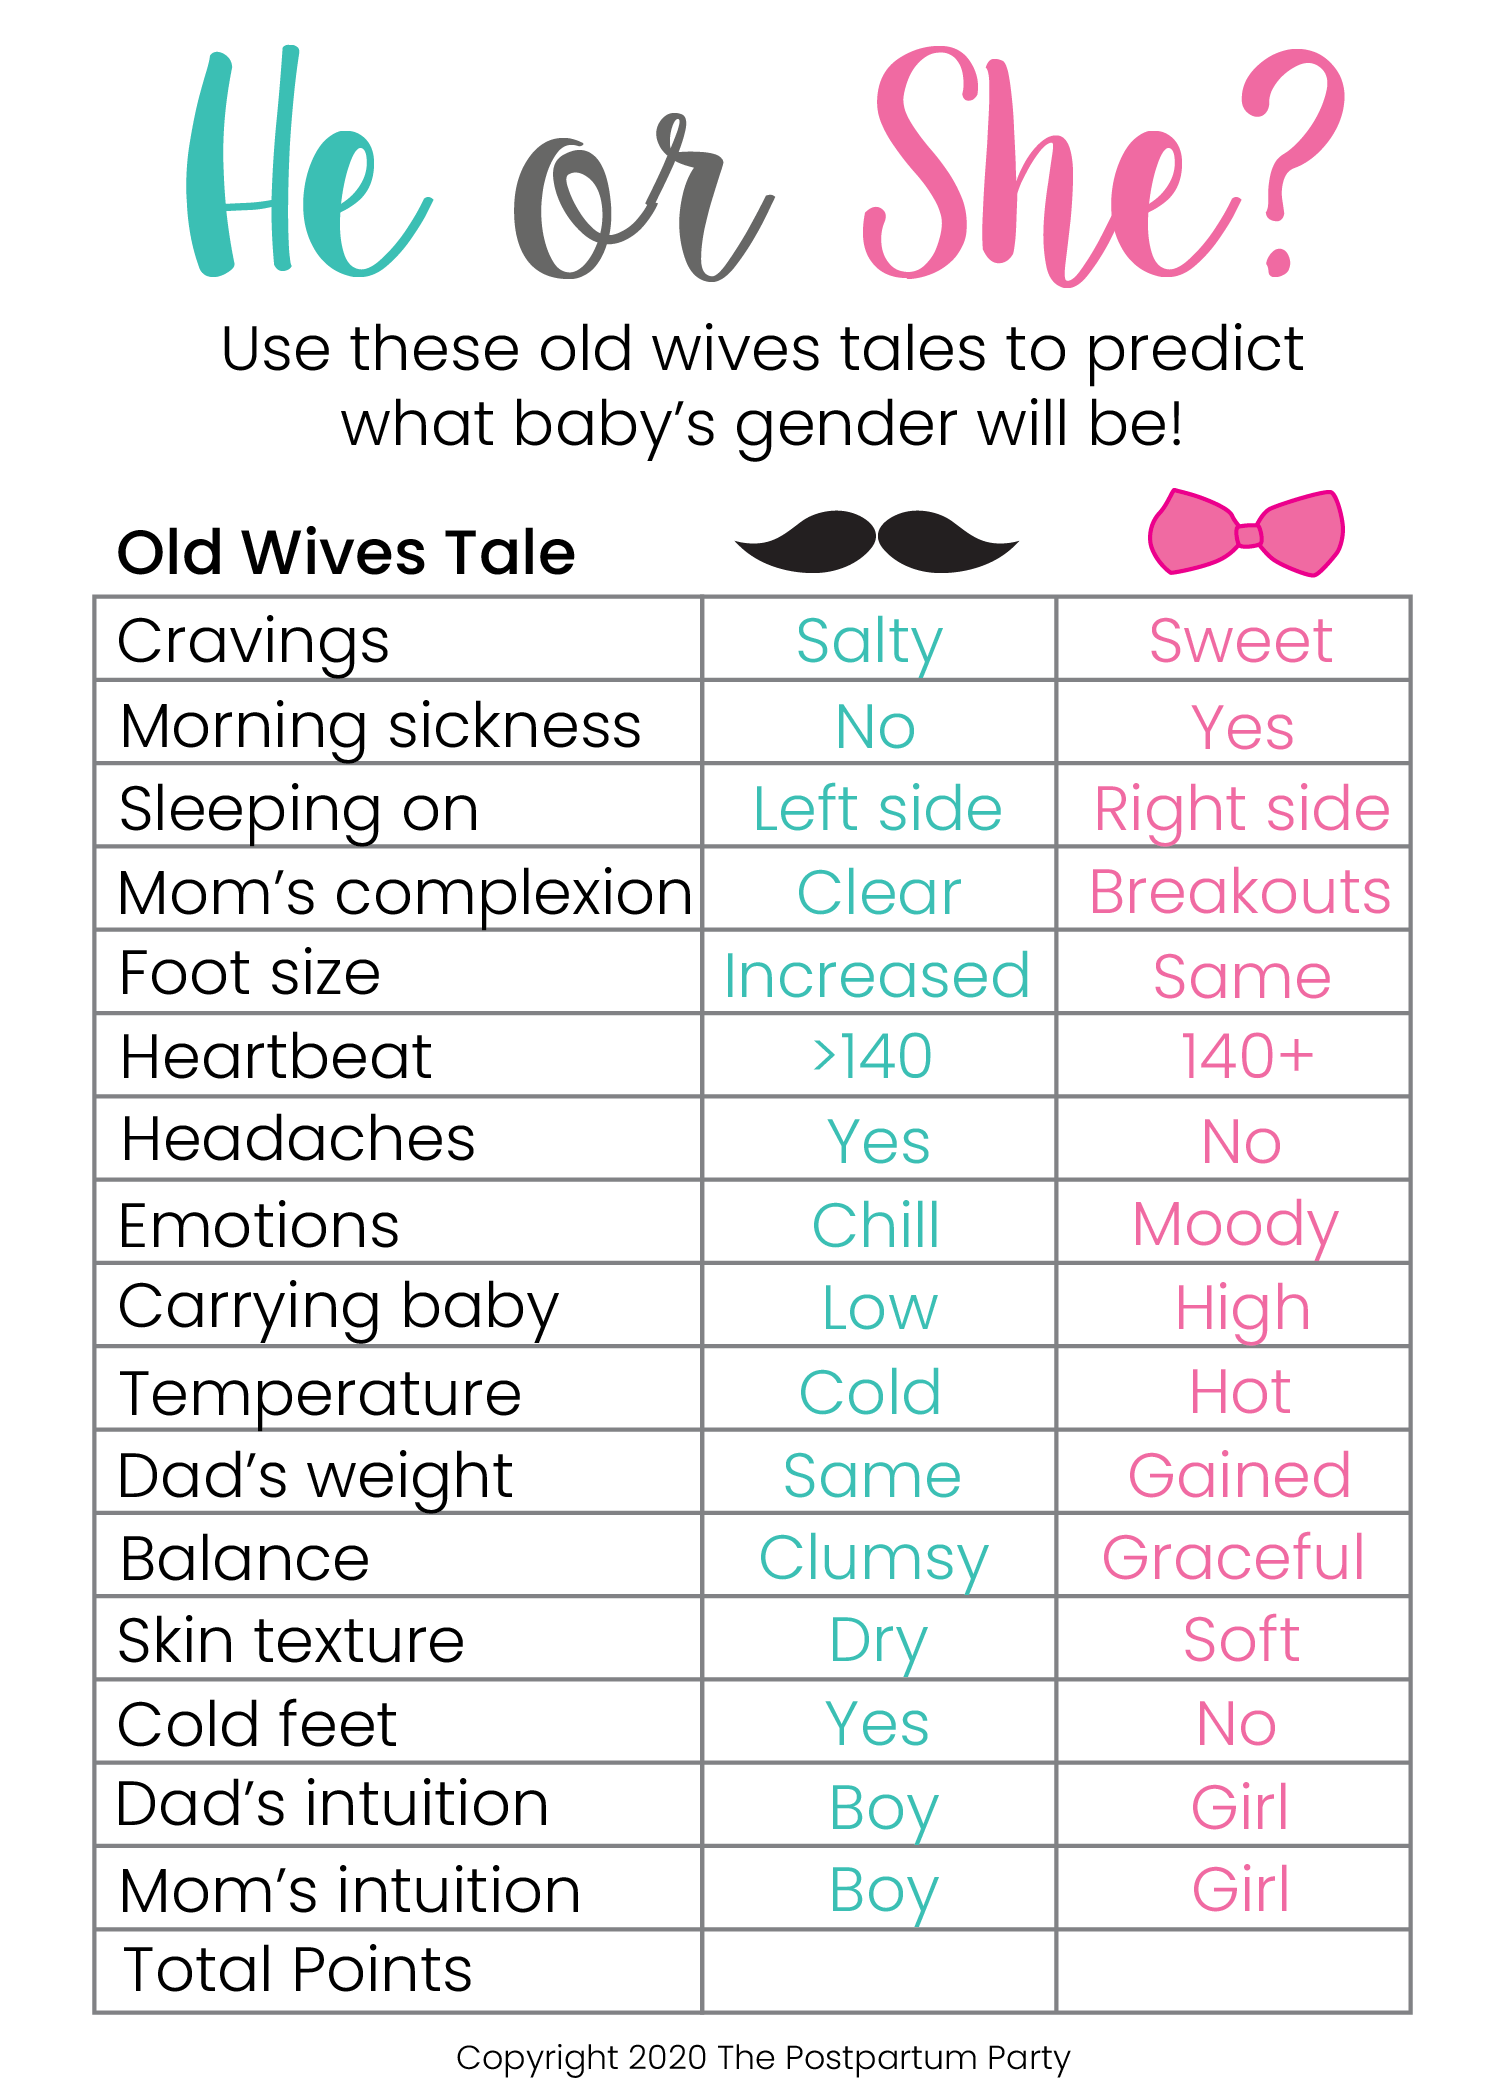 Printable Old Wives Tales Quiz to Predict Baby’s Gender